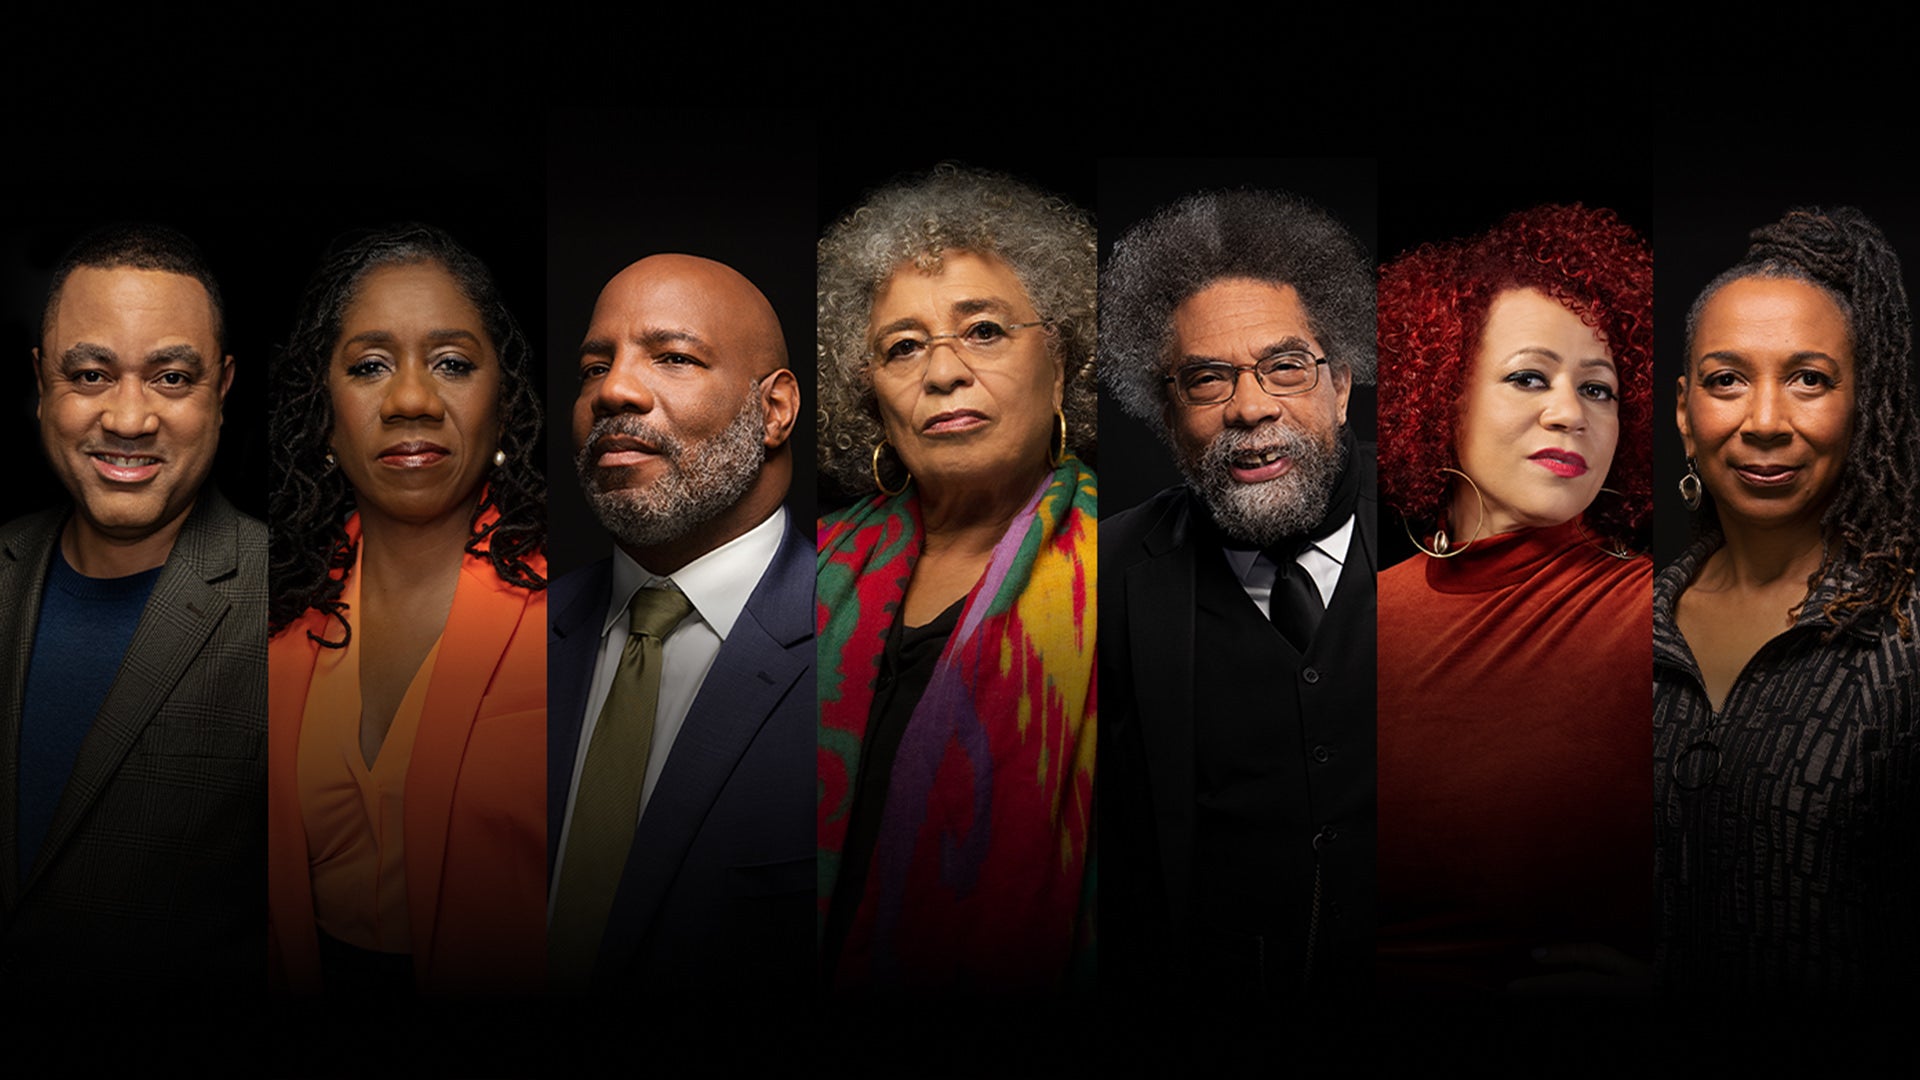 Angela Davis, Cornel West, and Others Join MasterClass for New Course on Black History, Black Freedom, and Black Love